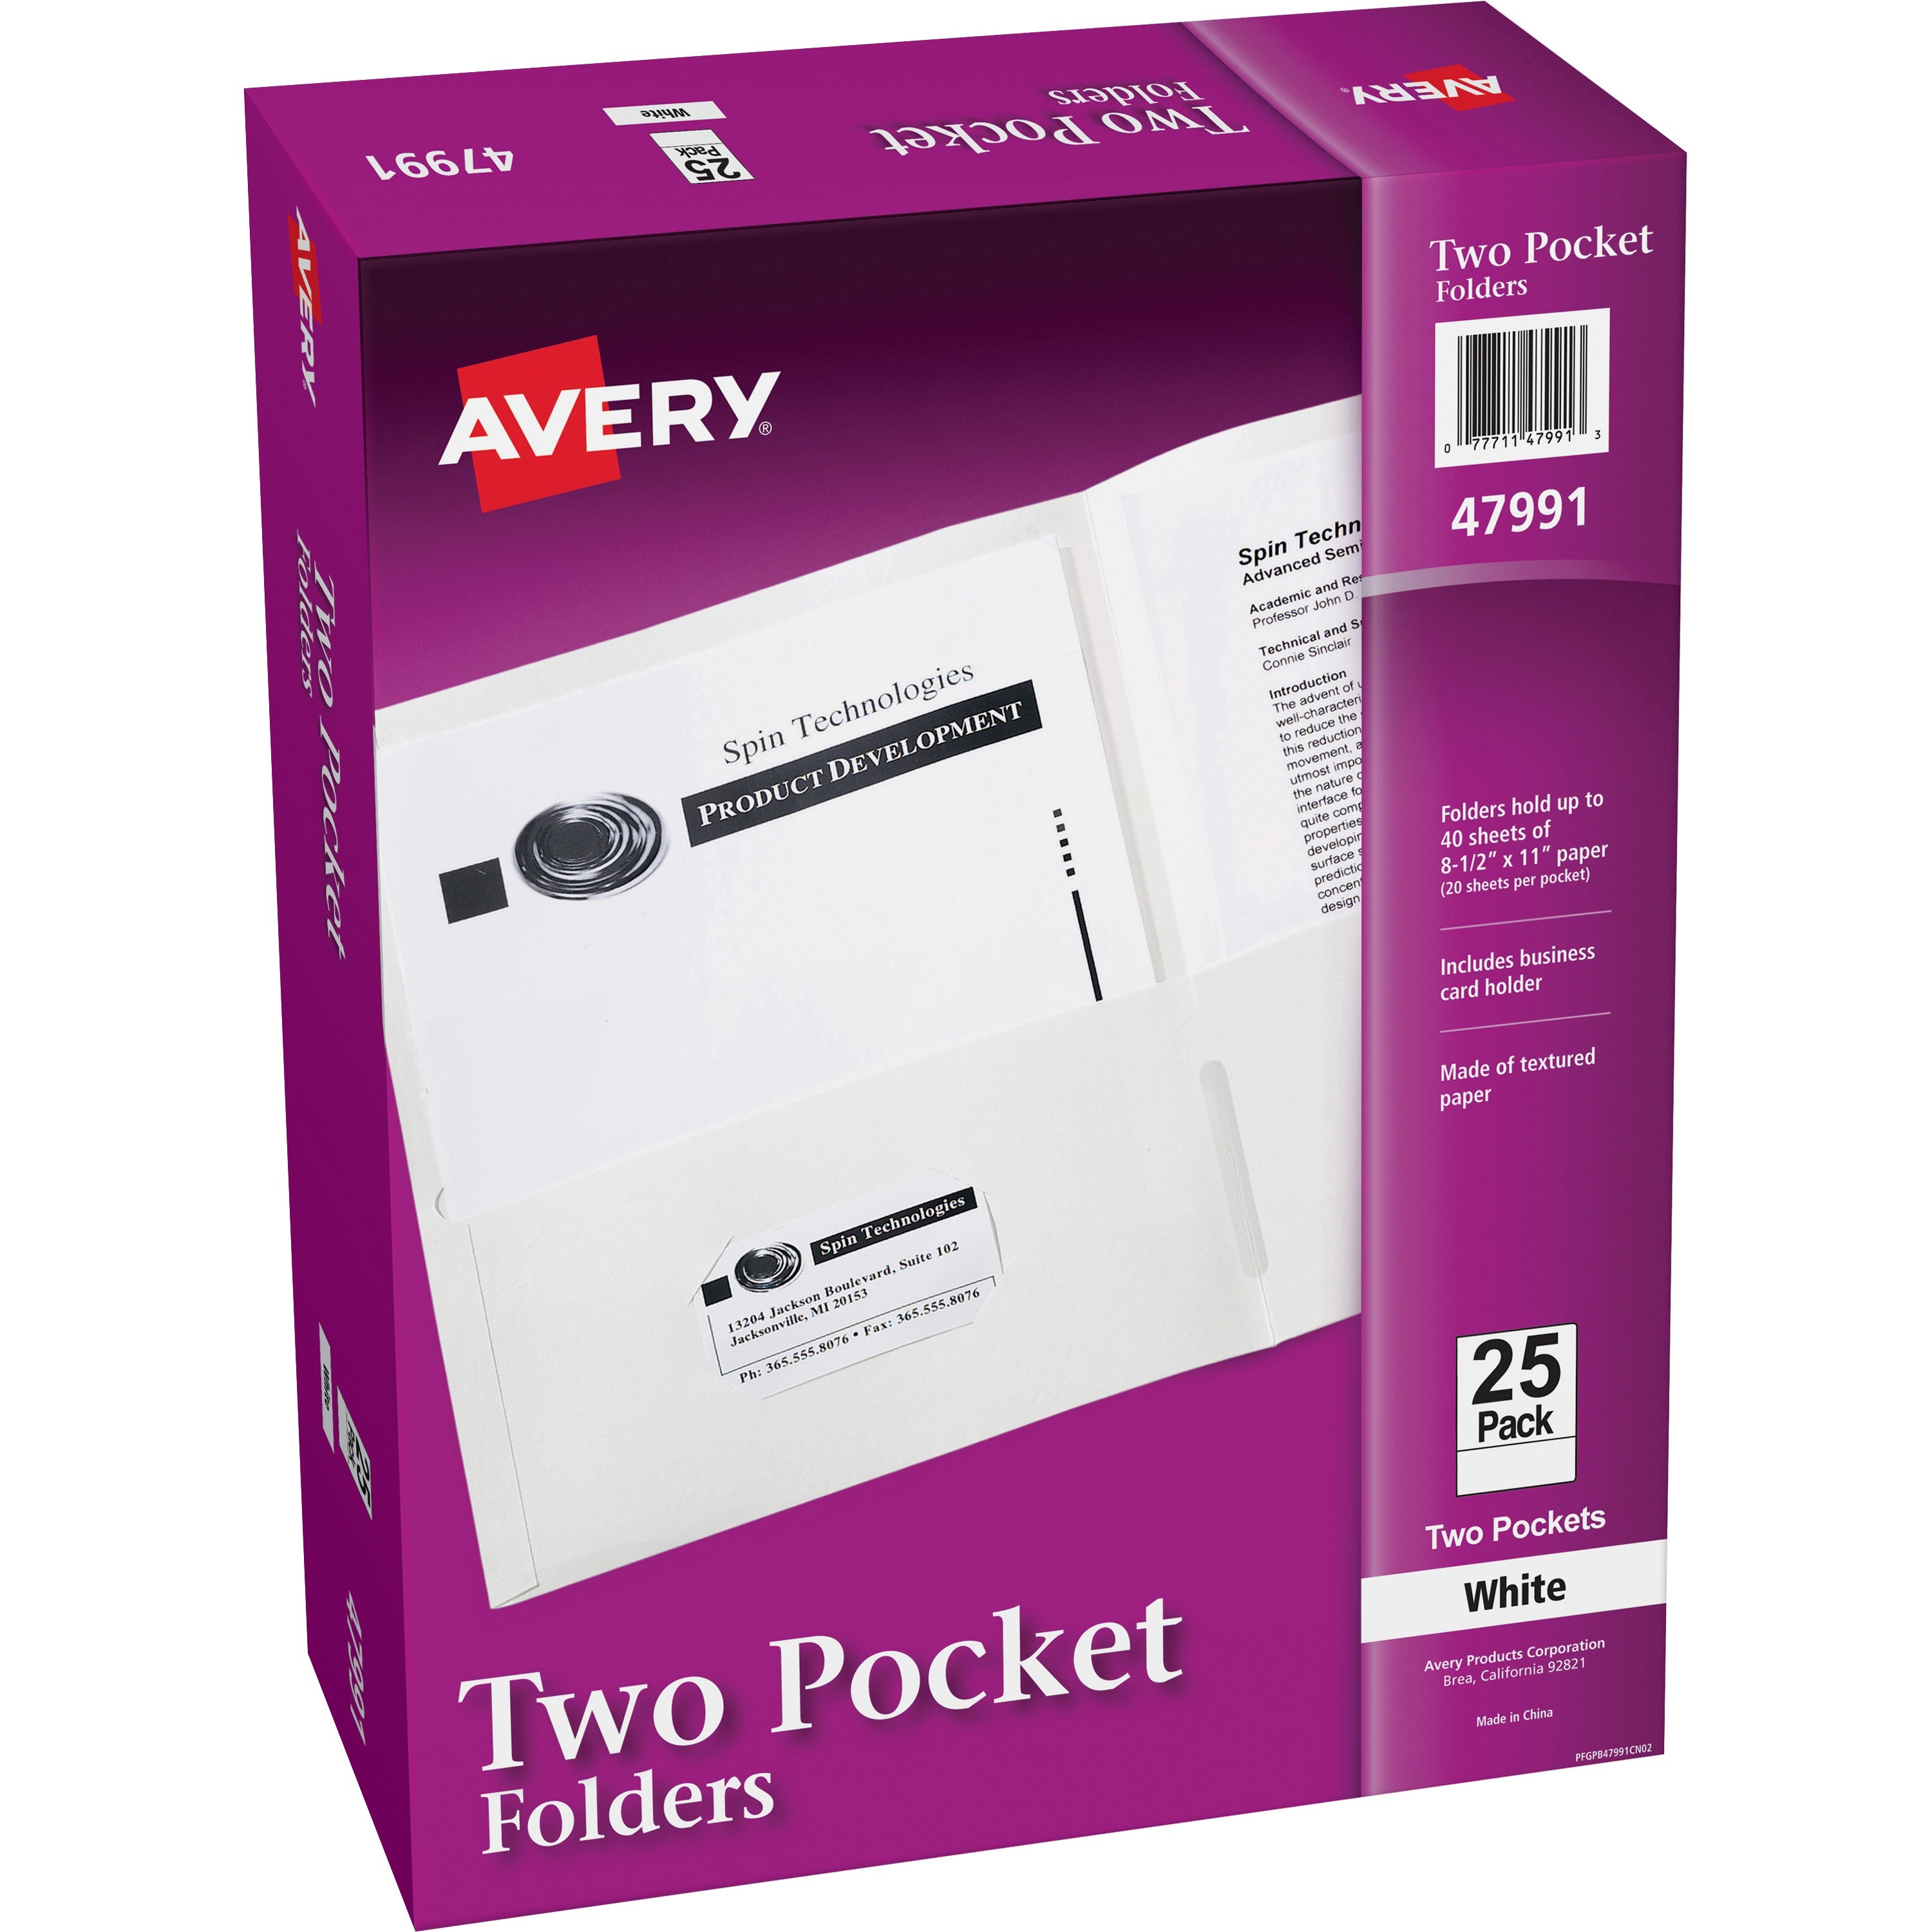 Avery Consumer Products Flexible Presentation Binder- View Pocket